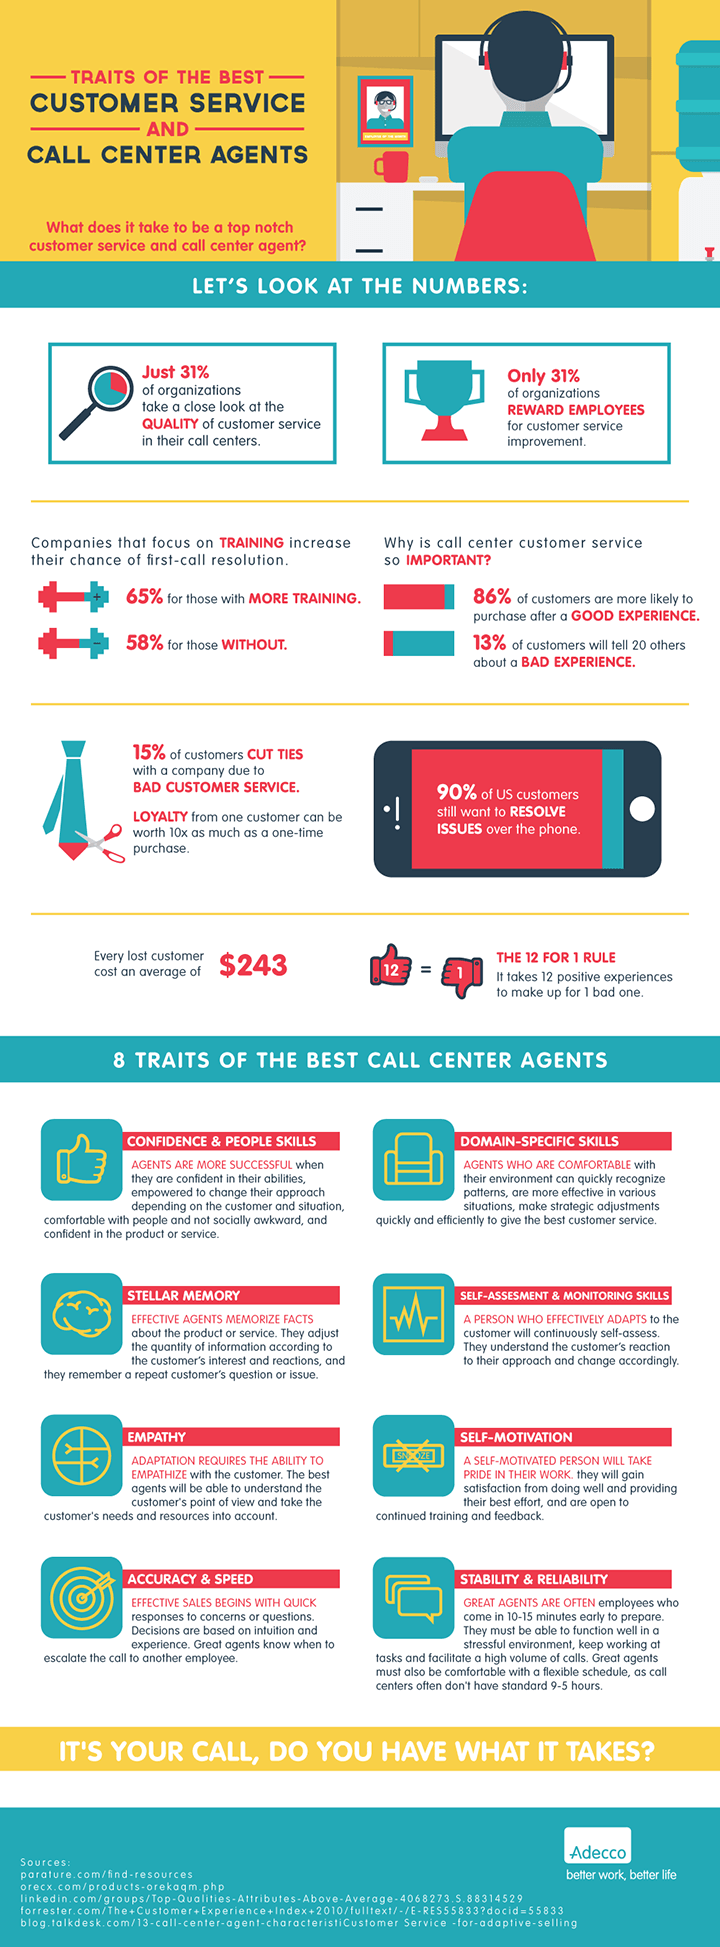 Traits Of The Best Customer Service And Call Center Agents